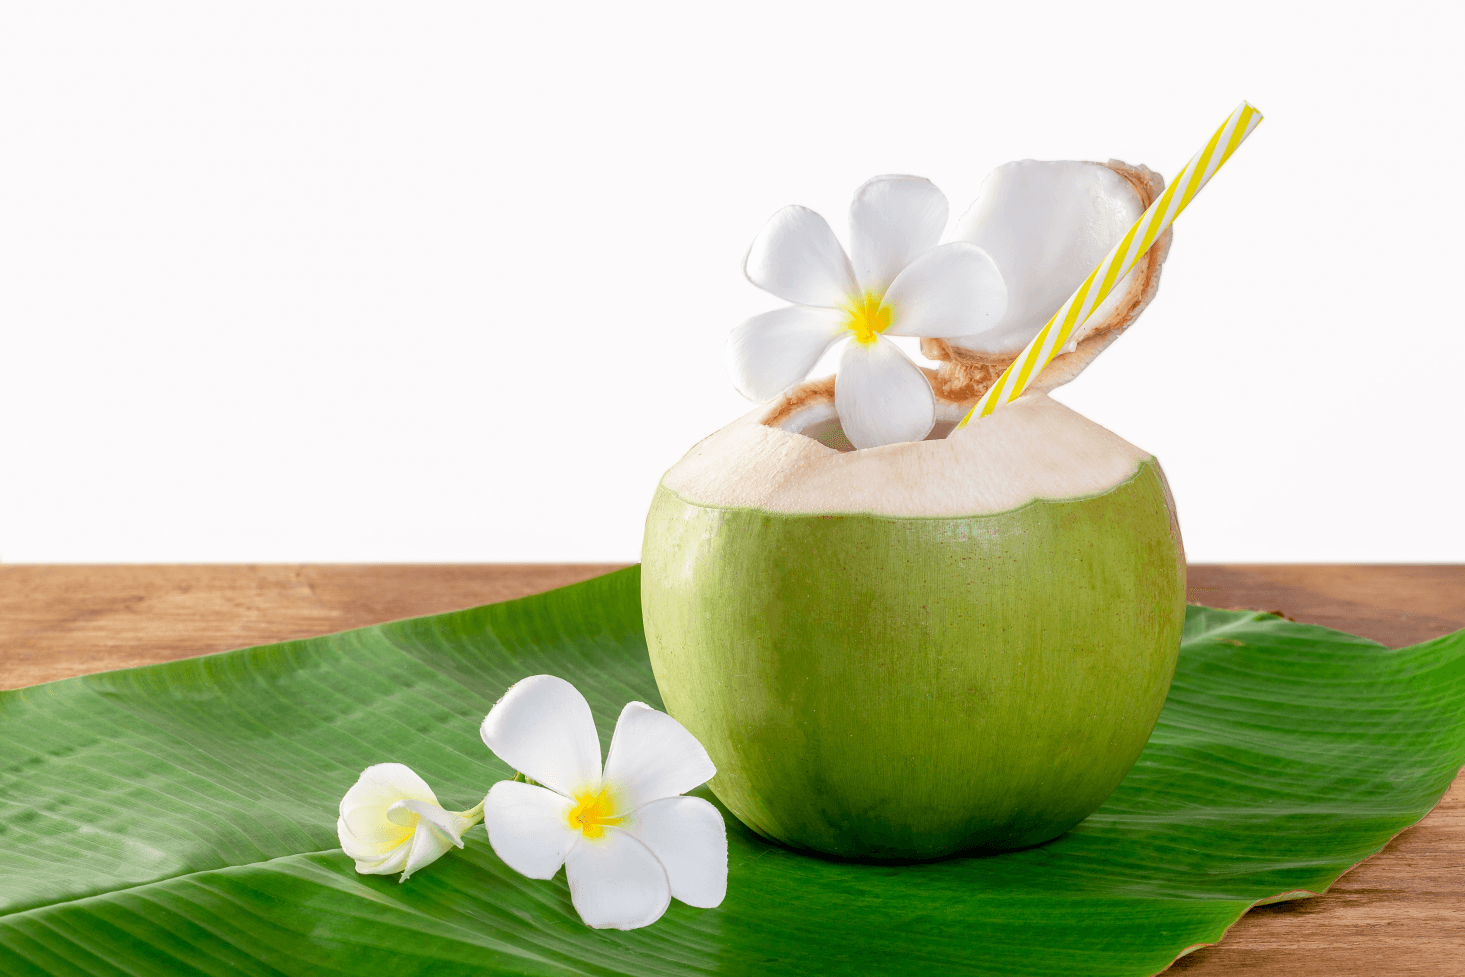 12 Health Benefits Of Coconut Water and Nutritional Facts